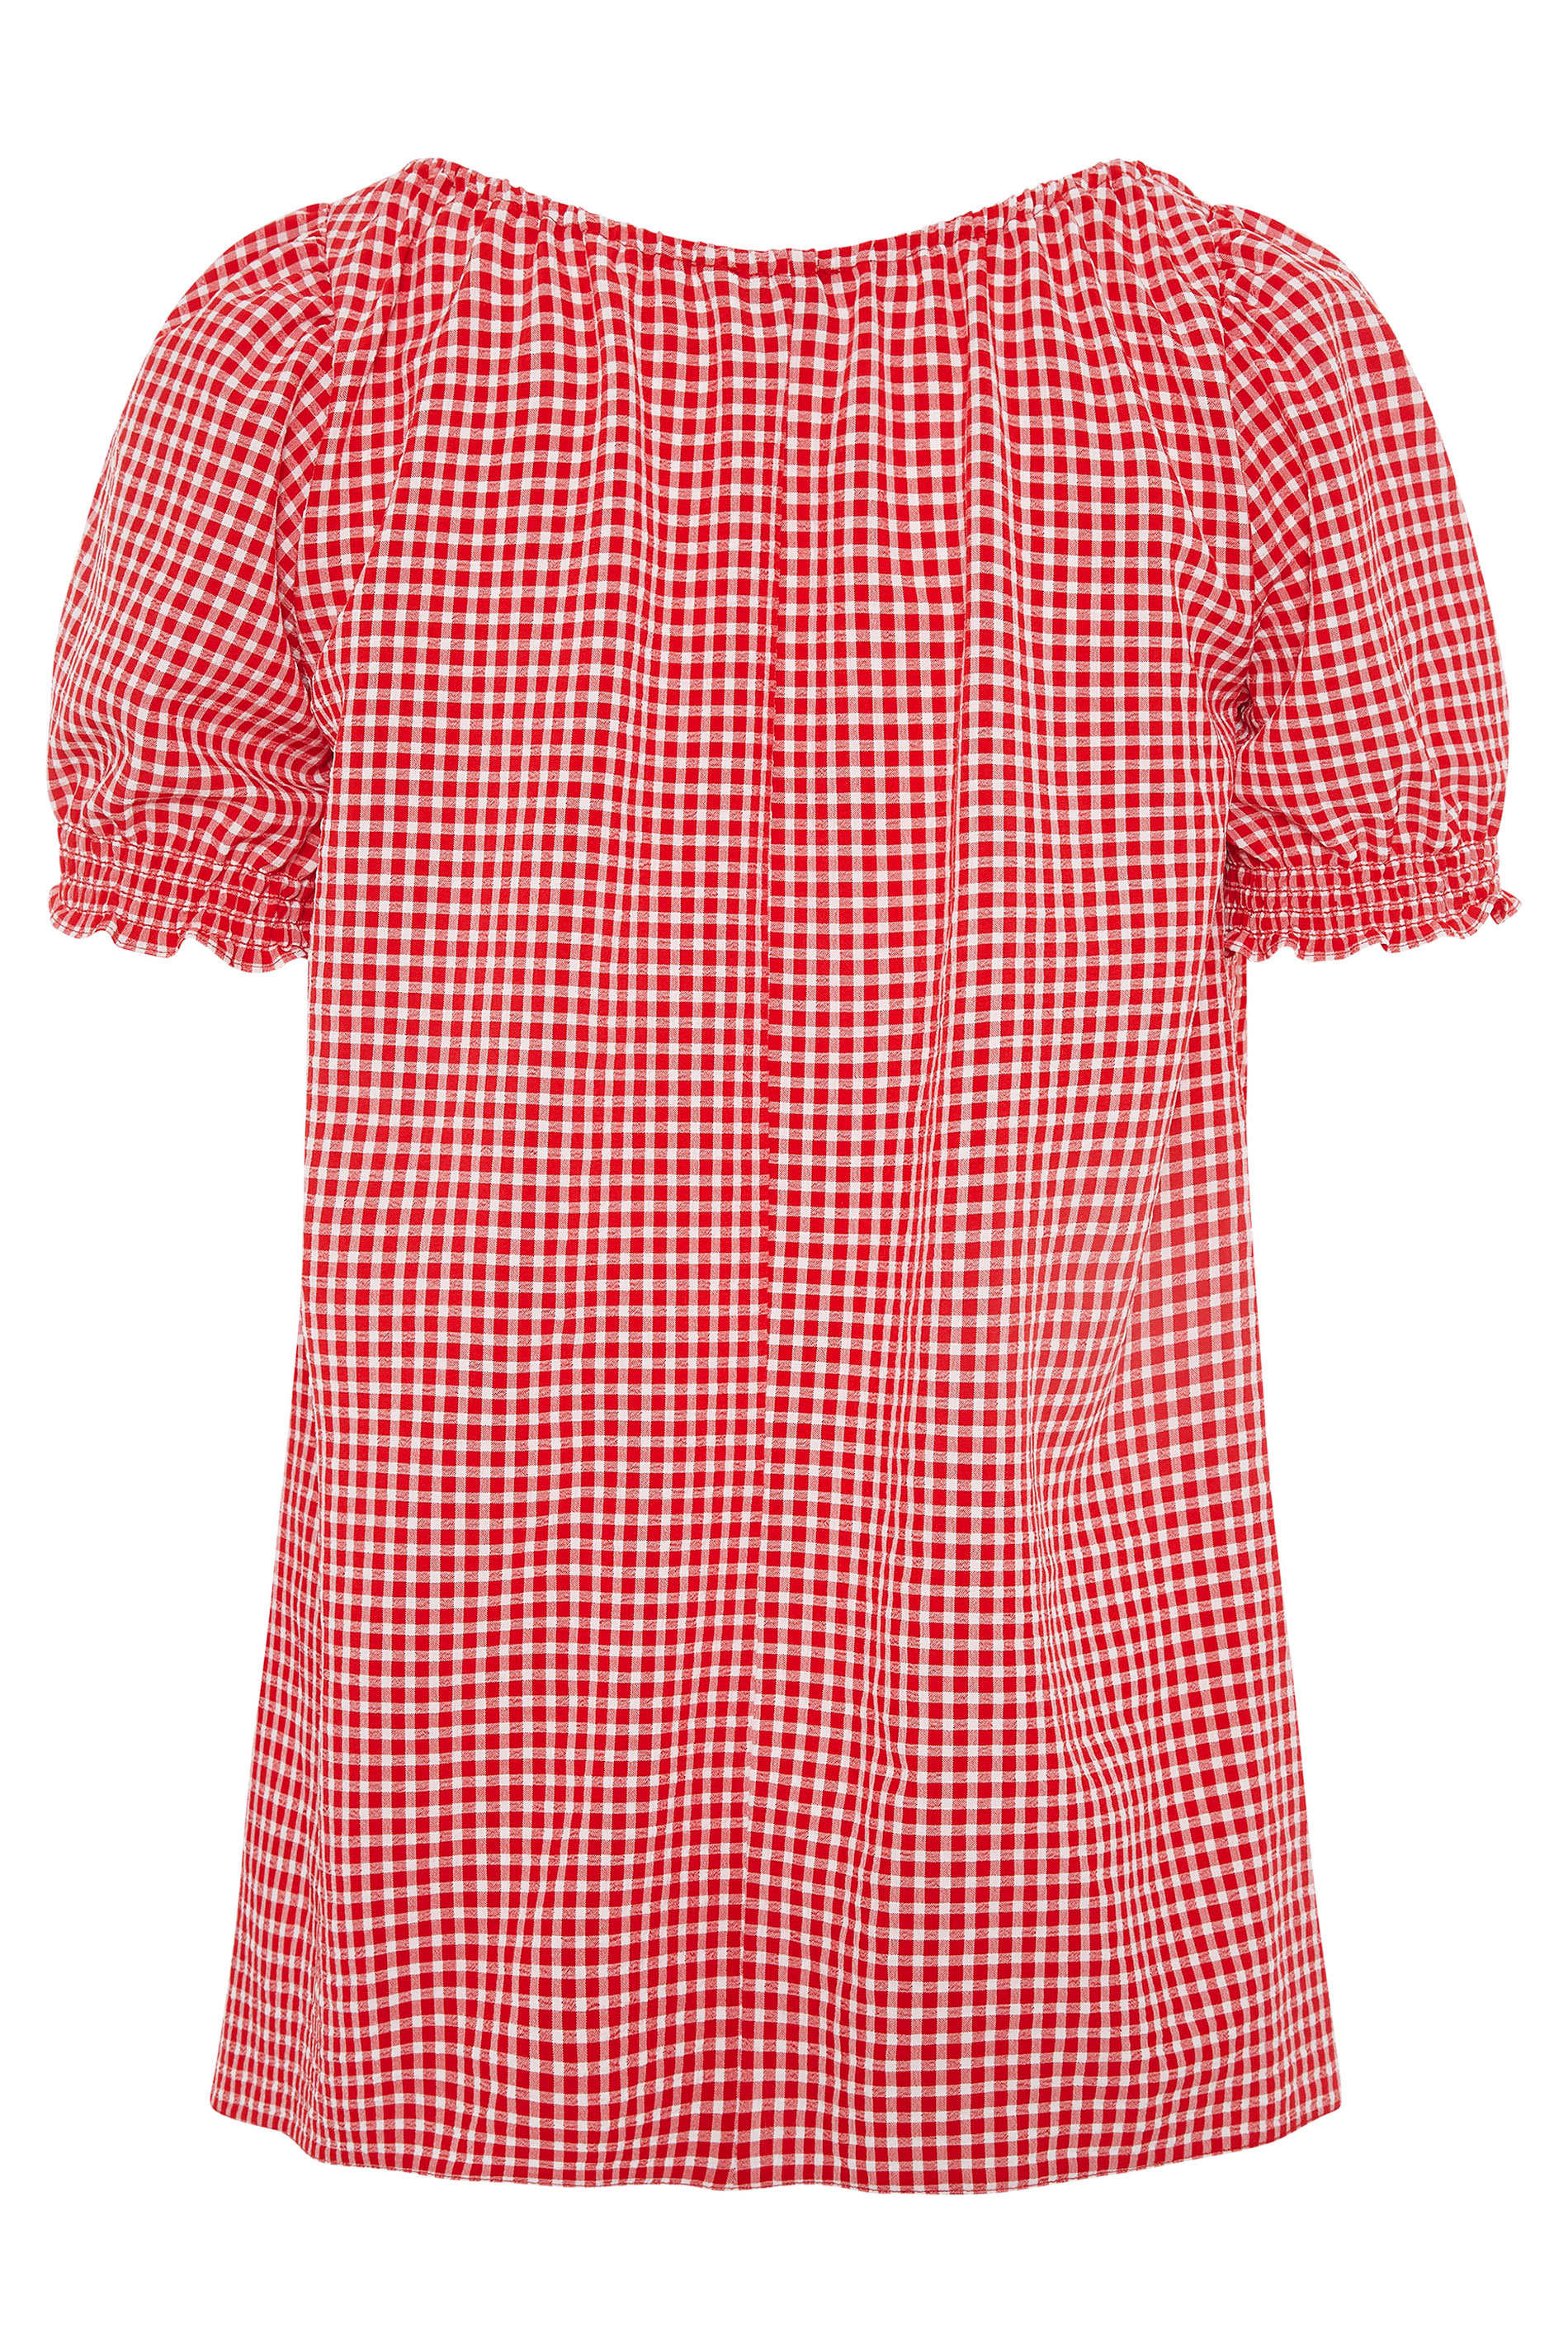 YOURS LONDON Red Gingham Longline Gypsy ...